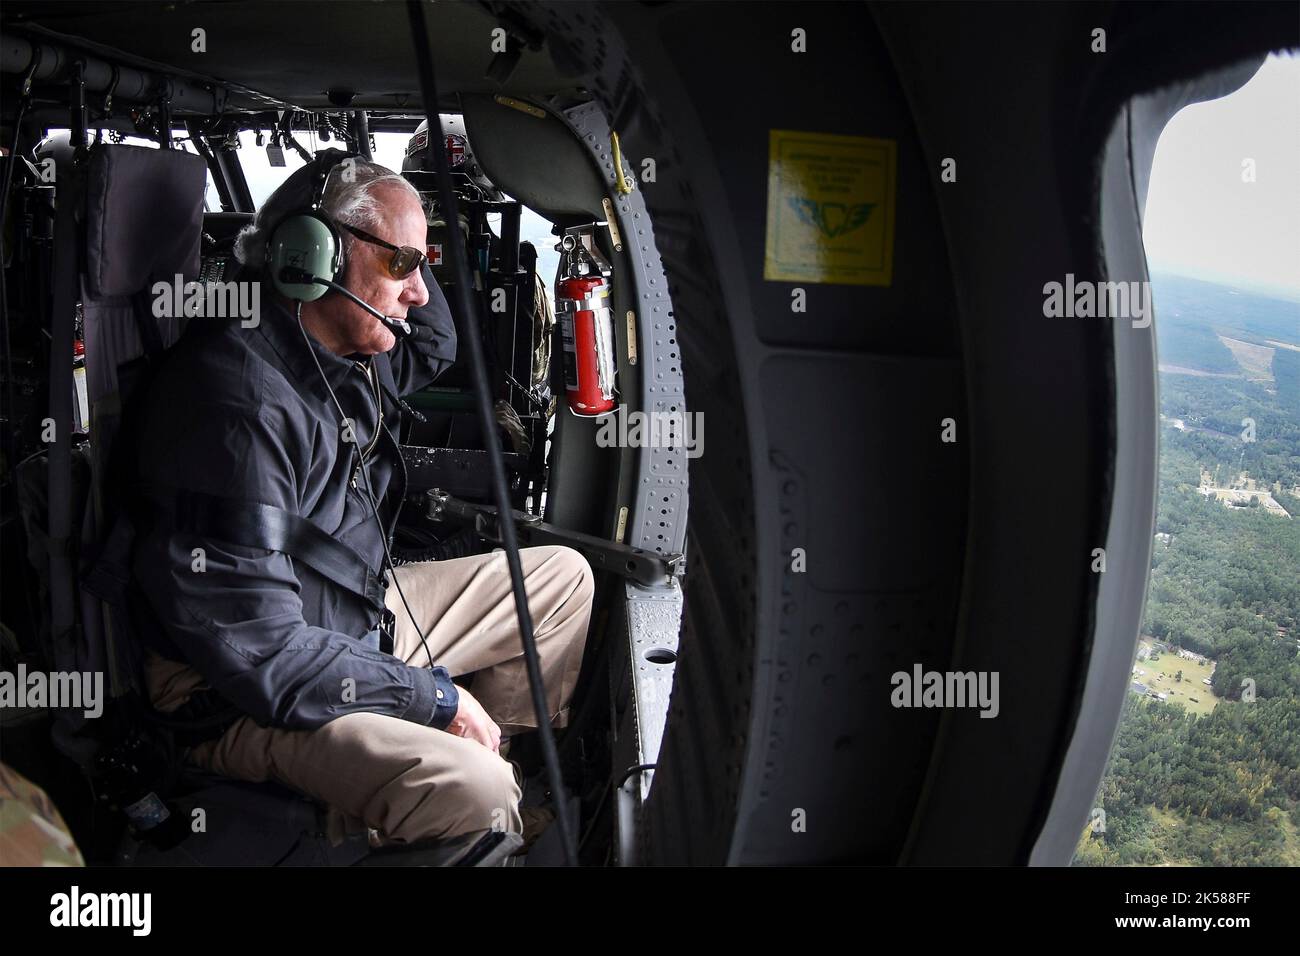 Georgetown, United States. 01 October, 2022. South Carolina Gov. Henry McMaster, assesses storm damage from a National Guard UH-60 helicopter in the aftermath of the Category 1 Hurricane Ian, October 1, 2022 in Georgetown, South Carolina. The storm surge from Hurricane Ian battered the Grand Strand region with high surf and winds. Stock Photo